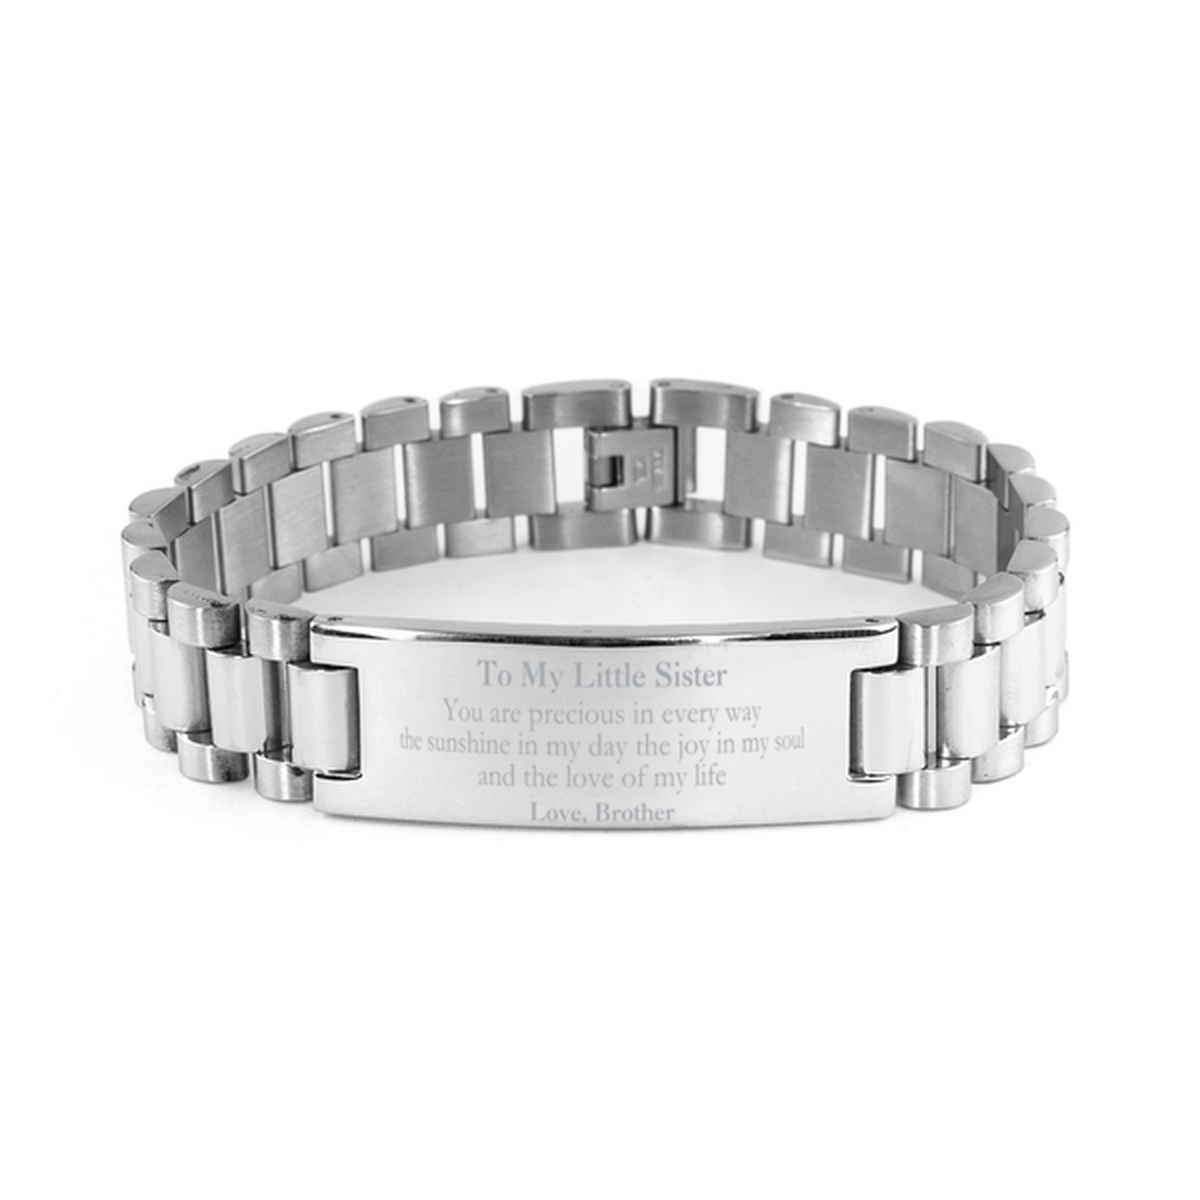 Graduation Gifts for Little Sister Ladder Stainless Steel Bracelet Present from Brother, Christmas Little Sister Birthday Gifts Little Sister You are precious in every way the sunshine in my day. Love, Brother